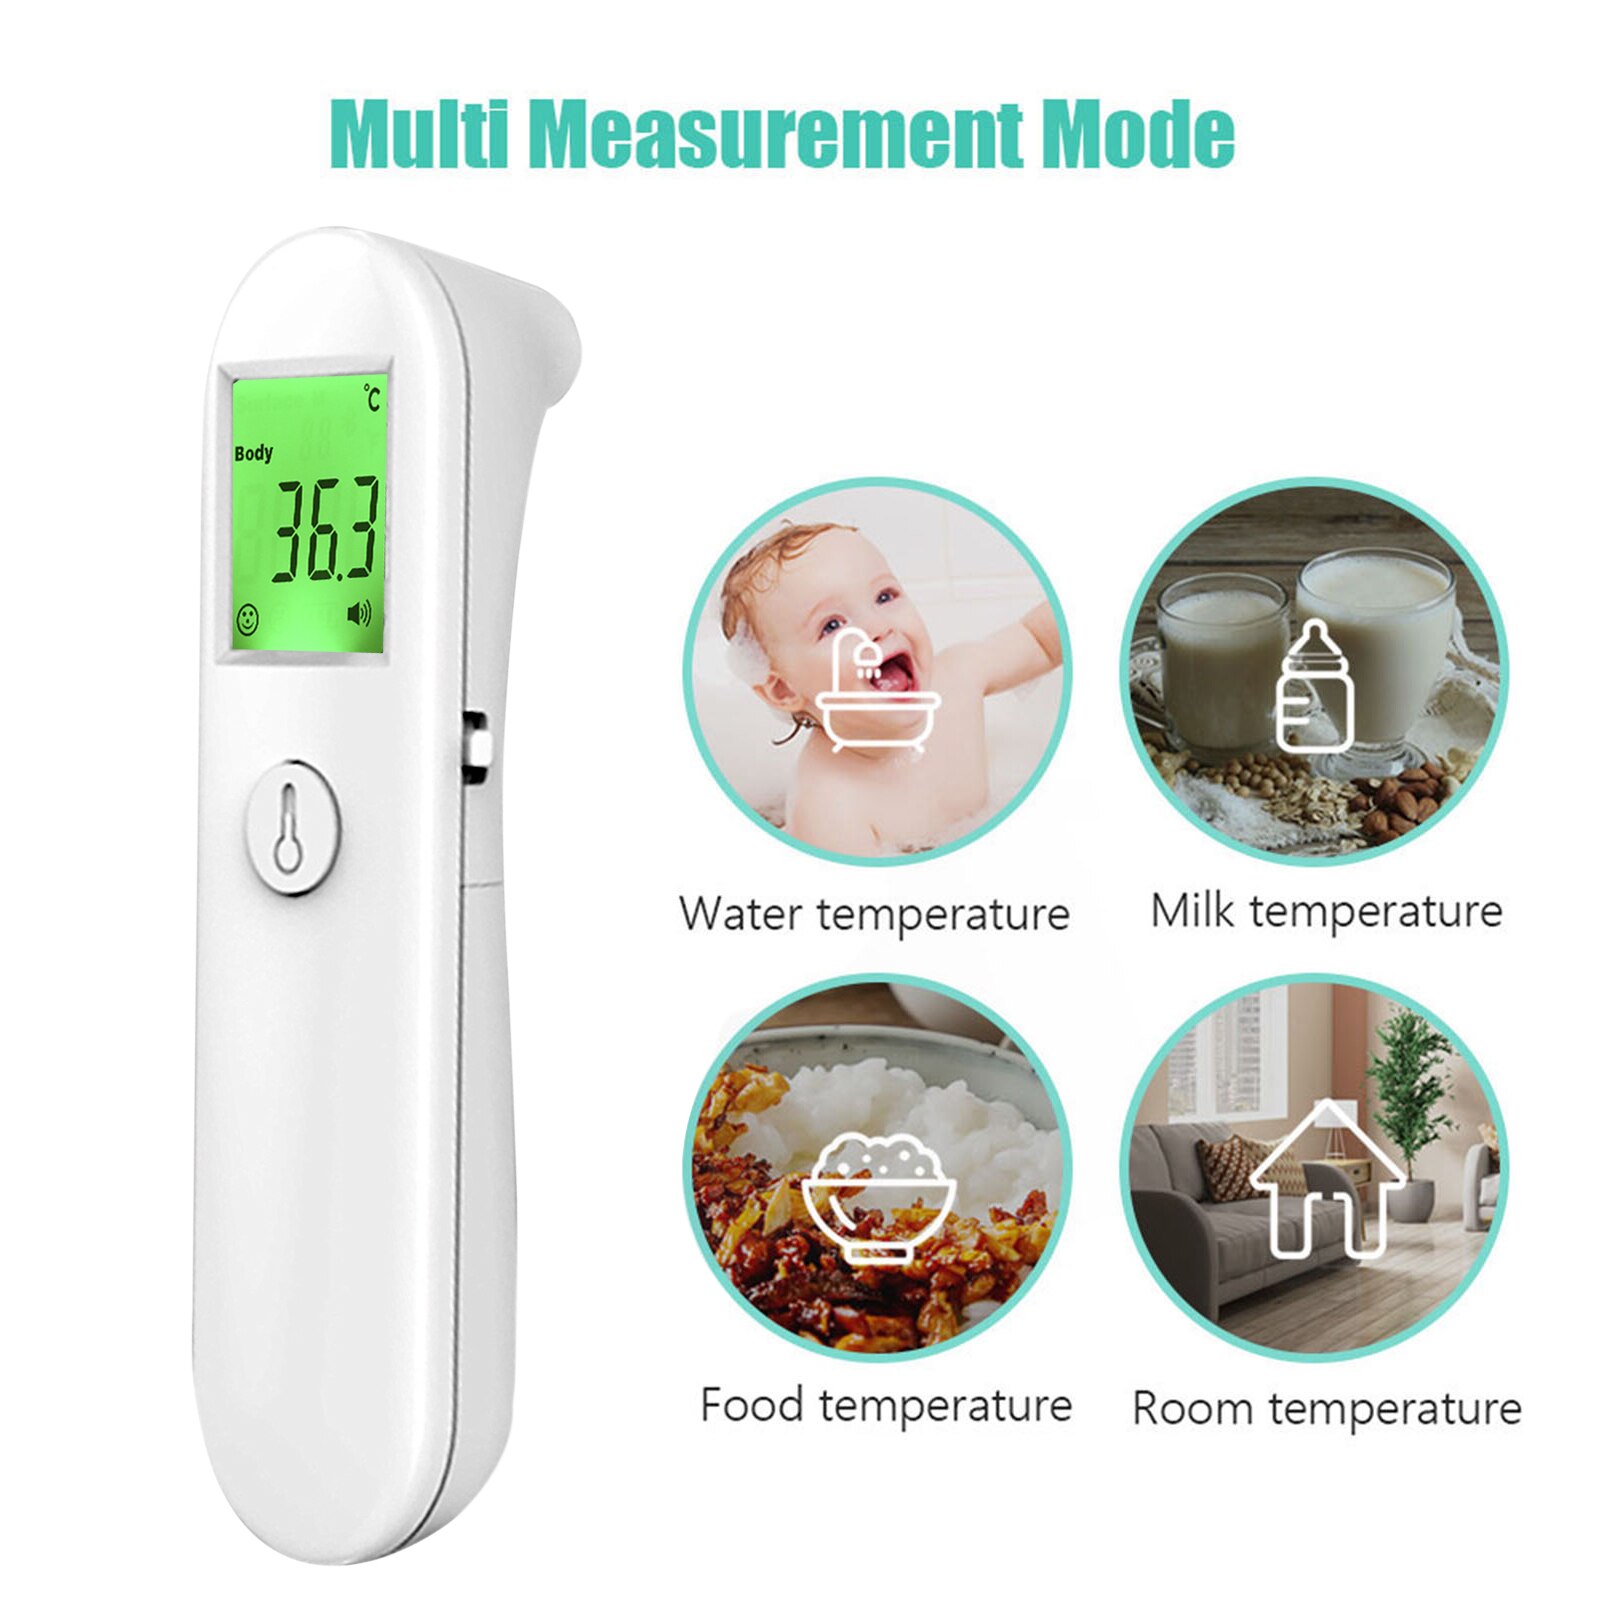 Digital Thermometer Forehead Ear Non-Contact Body Termometro Infrared ℃/℉ Adult Body Fever IR Children/Adult Thermometer